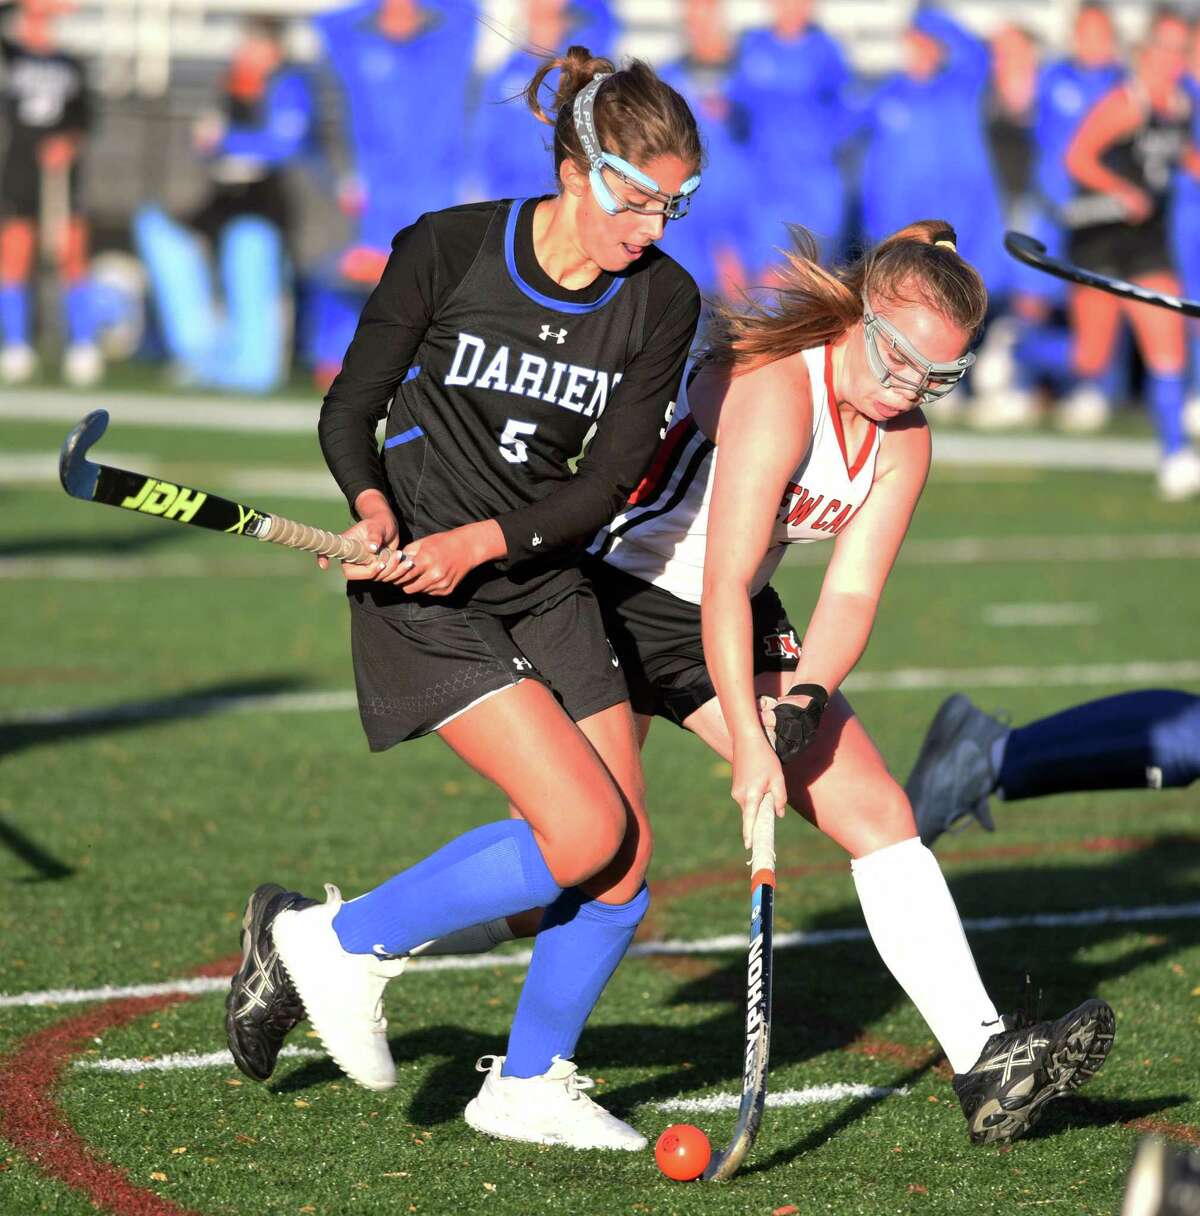 Darien’s Mackenzie O’Shea (5) and New Canaan’s Keira Cooney battle for the ball during a field hockey game at Dunning Field in New Canaan on Friday, Oct. 18, 2019.